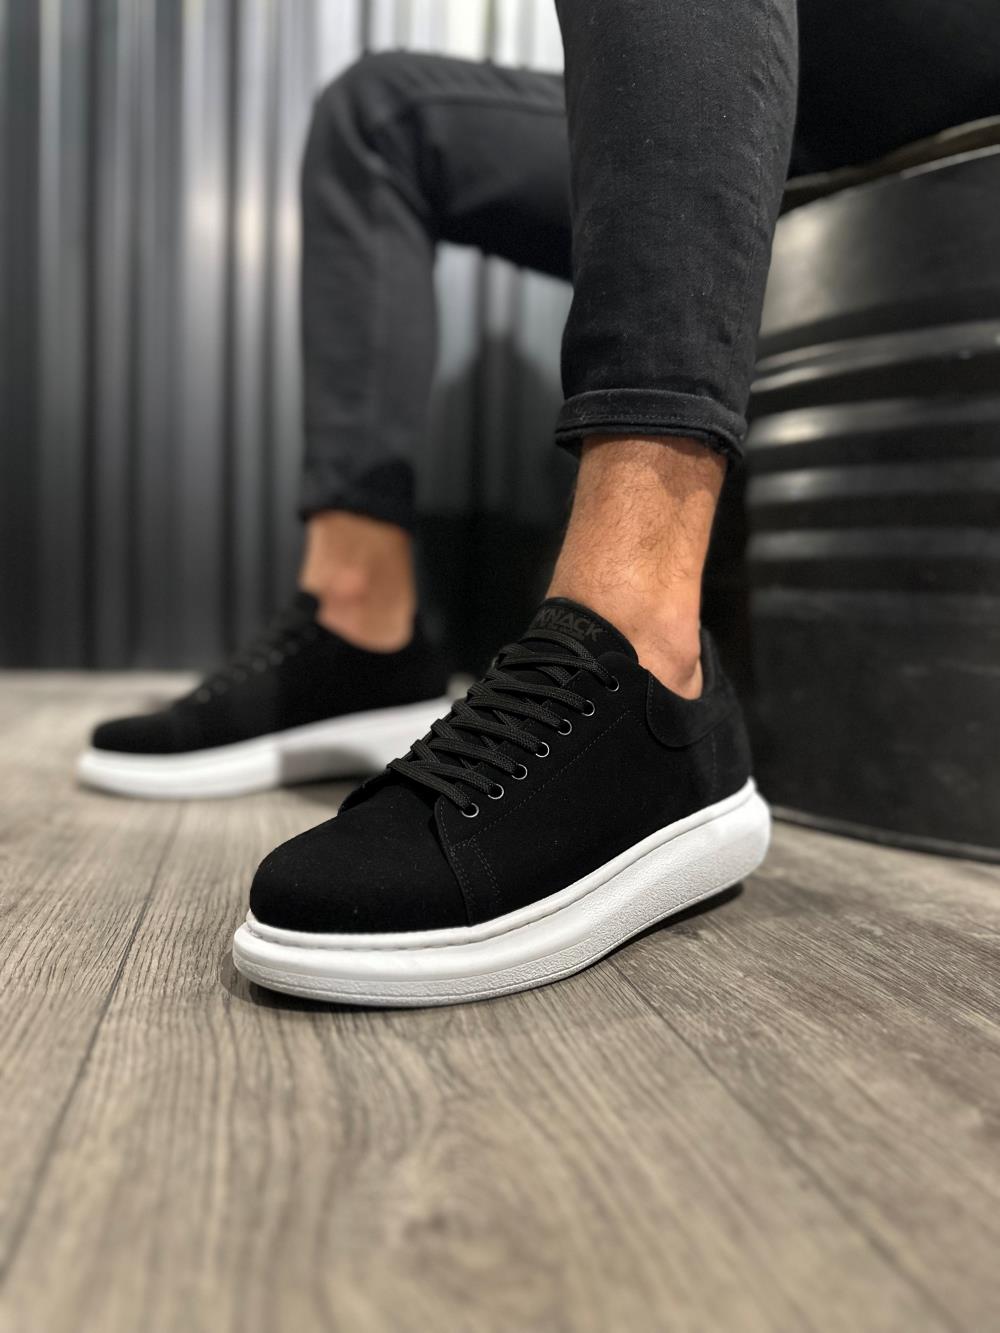 Men's High Sole Casual Shoes 044 Black Suede (White Sole) - STREETMODE™